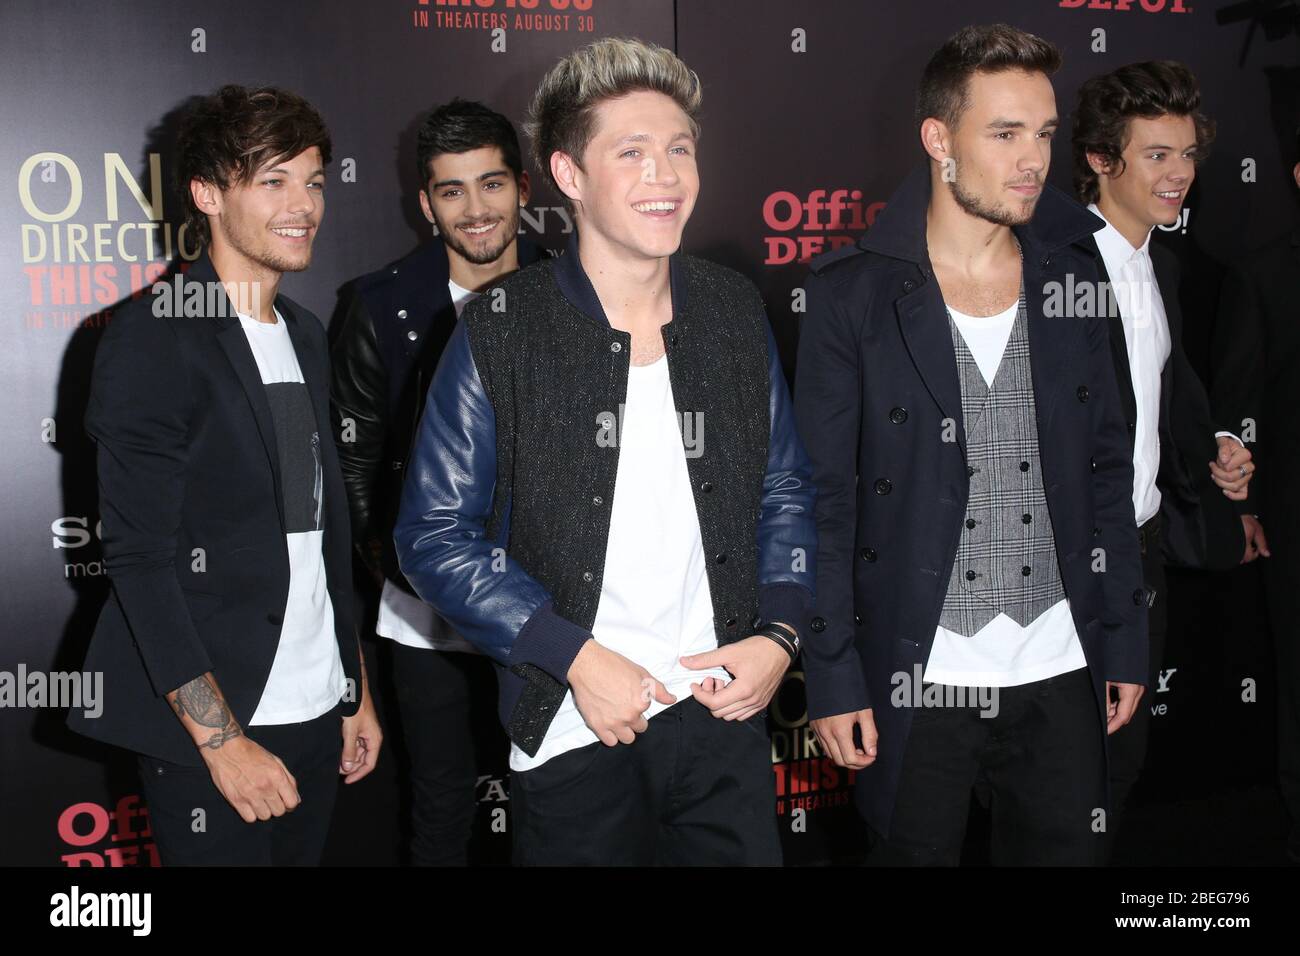 Louis Tomlinson, Niall Horan, Zayn Malik, Liam Payne and Harry Styles  attend the world premiere of 